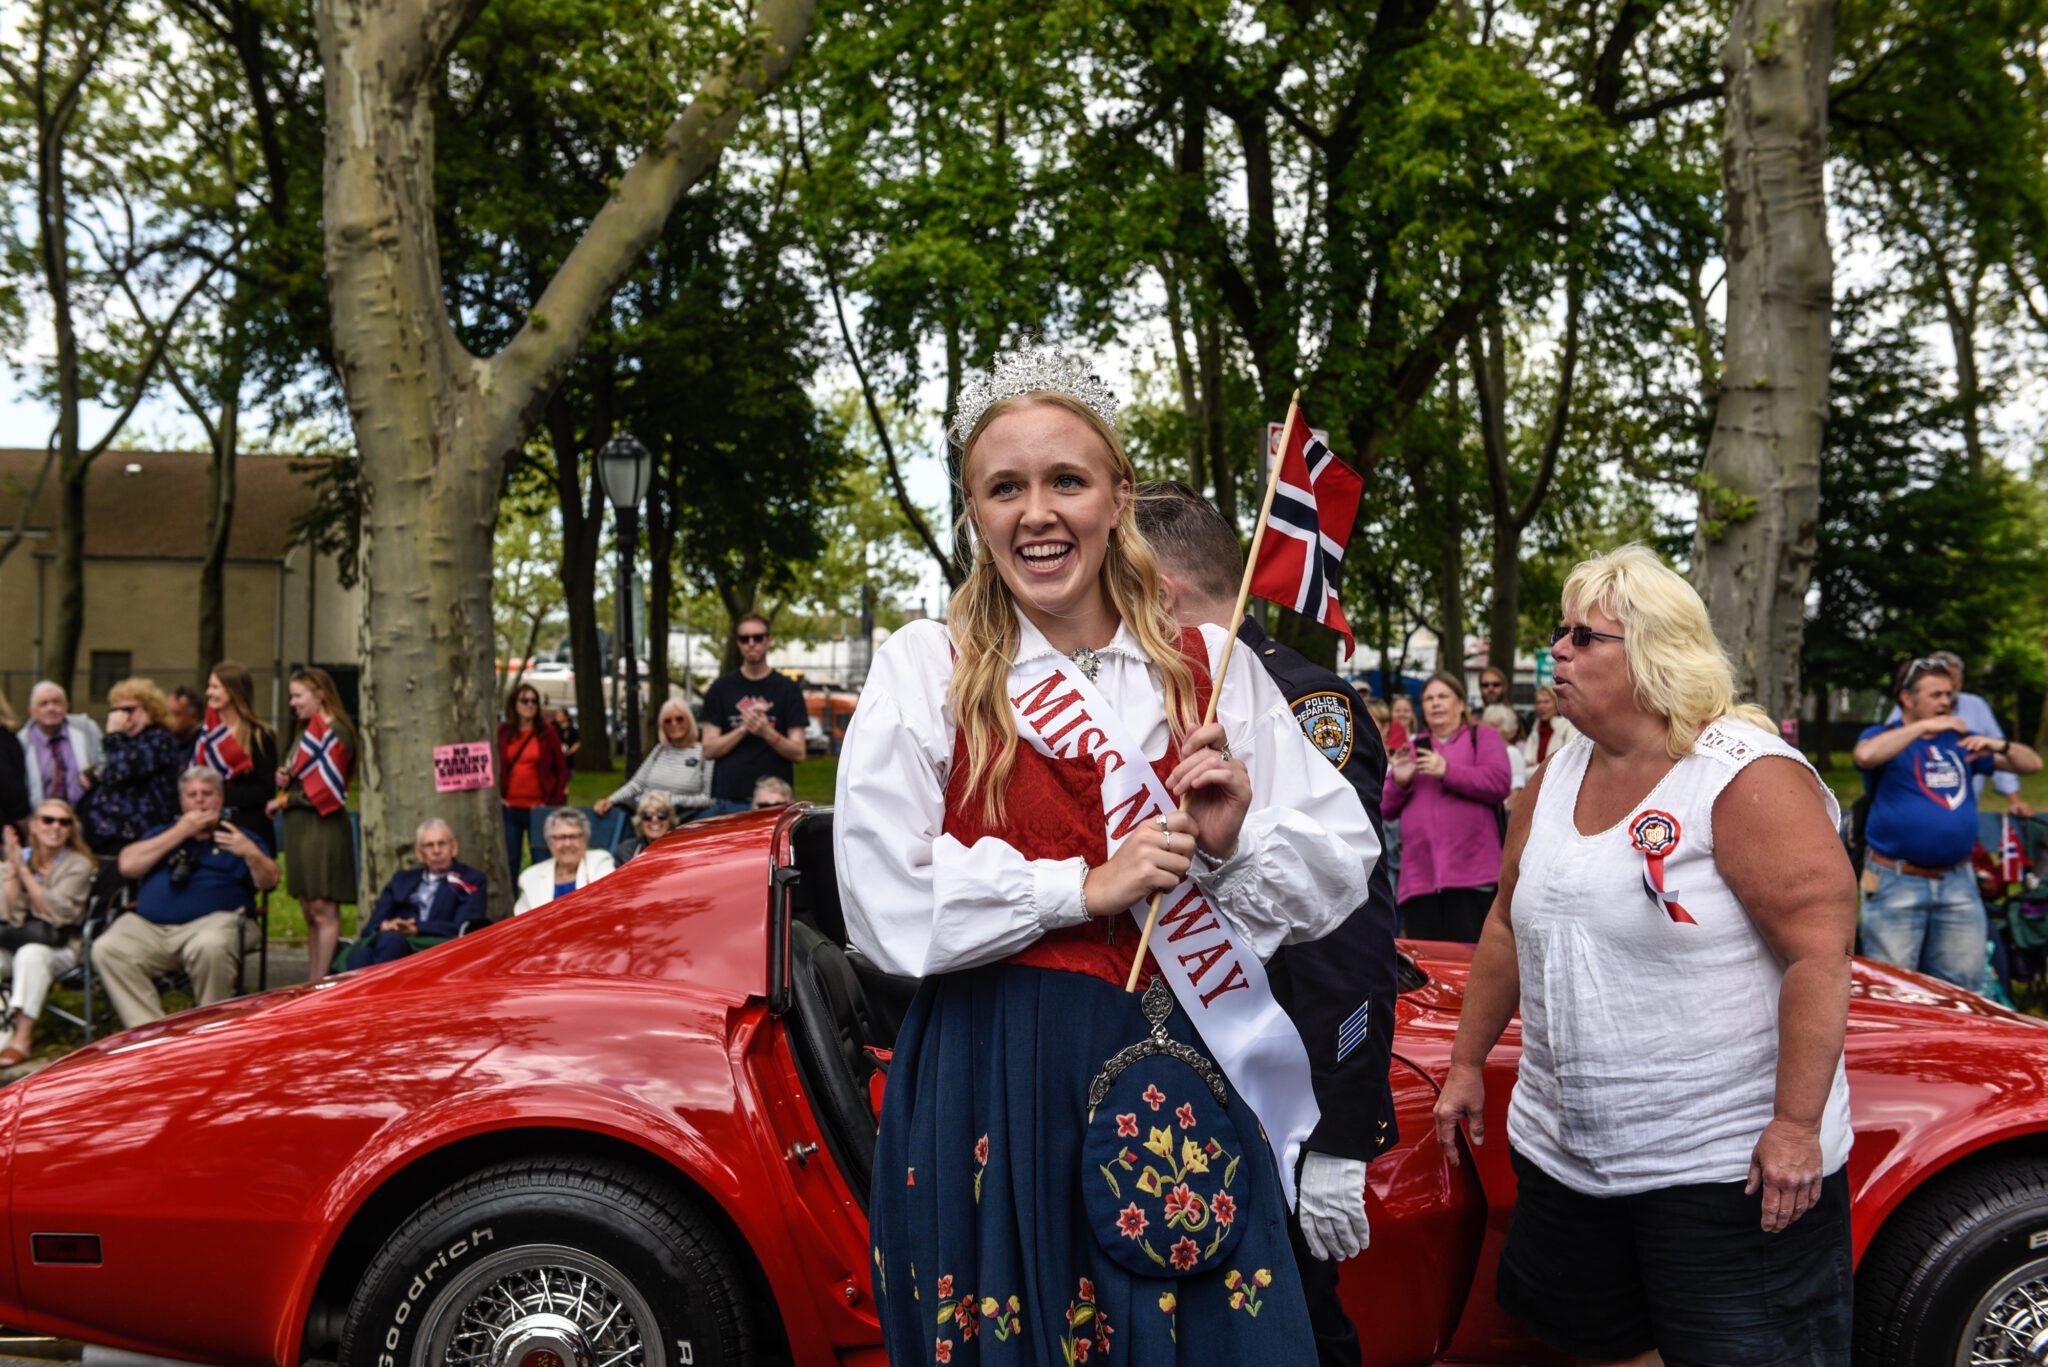 Photos from the 69th annual Norwegian Day Parade in Bay Ridge